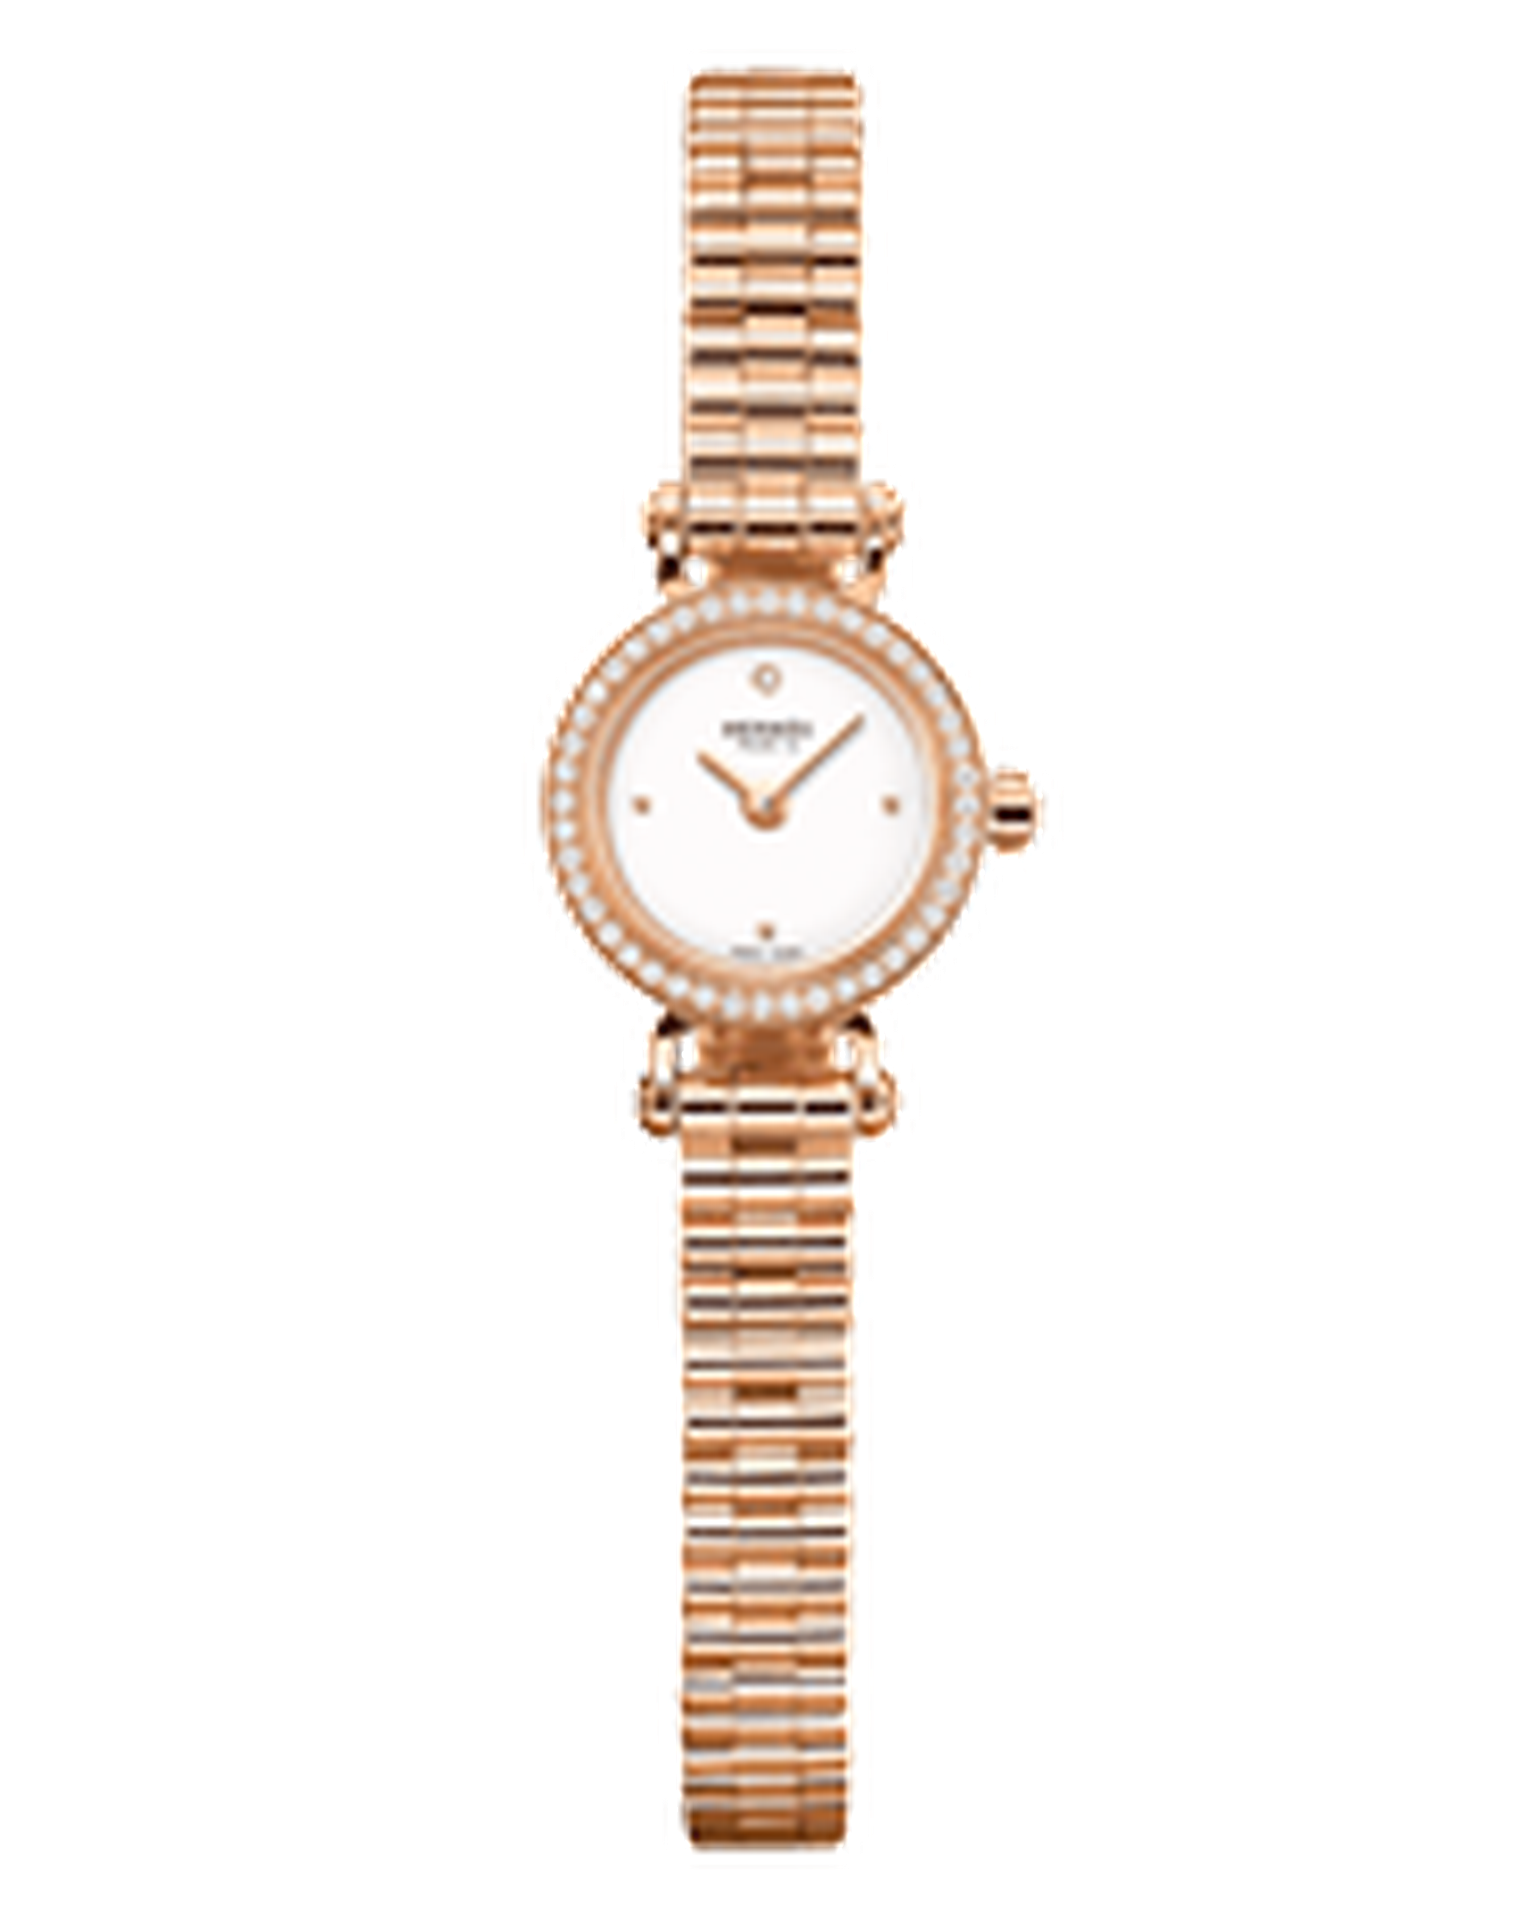 Hermes Faubourg watch in rose gold with diamonds_20140131_Thumbnail